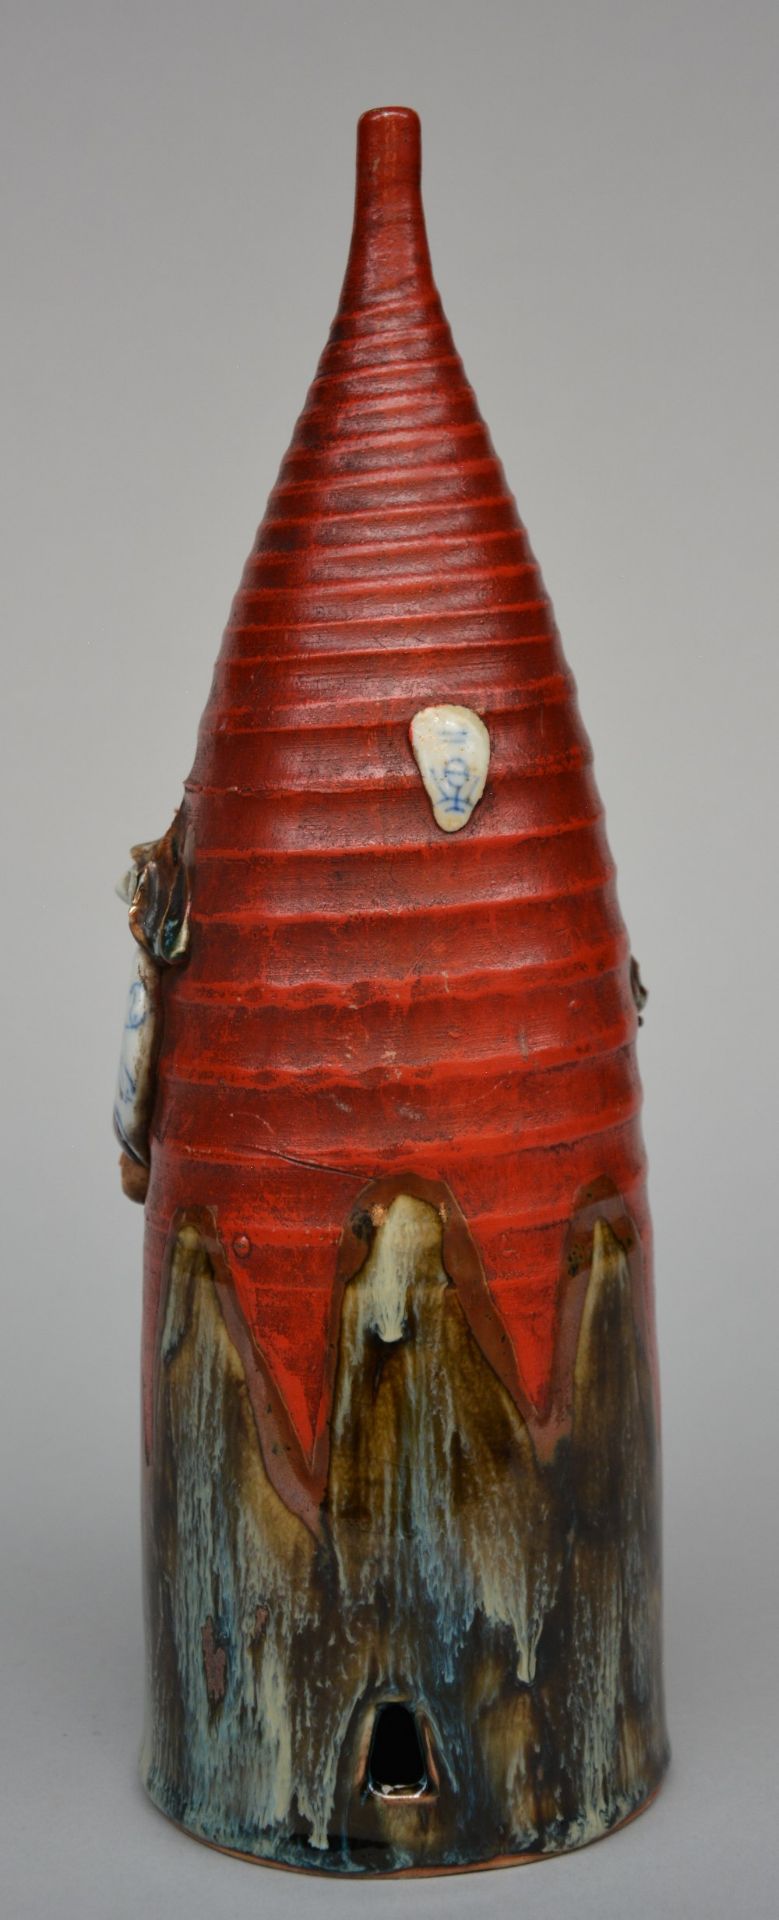 A Sumida Gawa vase, Japan, flambé glazed, polychrome and relief decorated with figures, marked, - Bild 3 aus 10